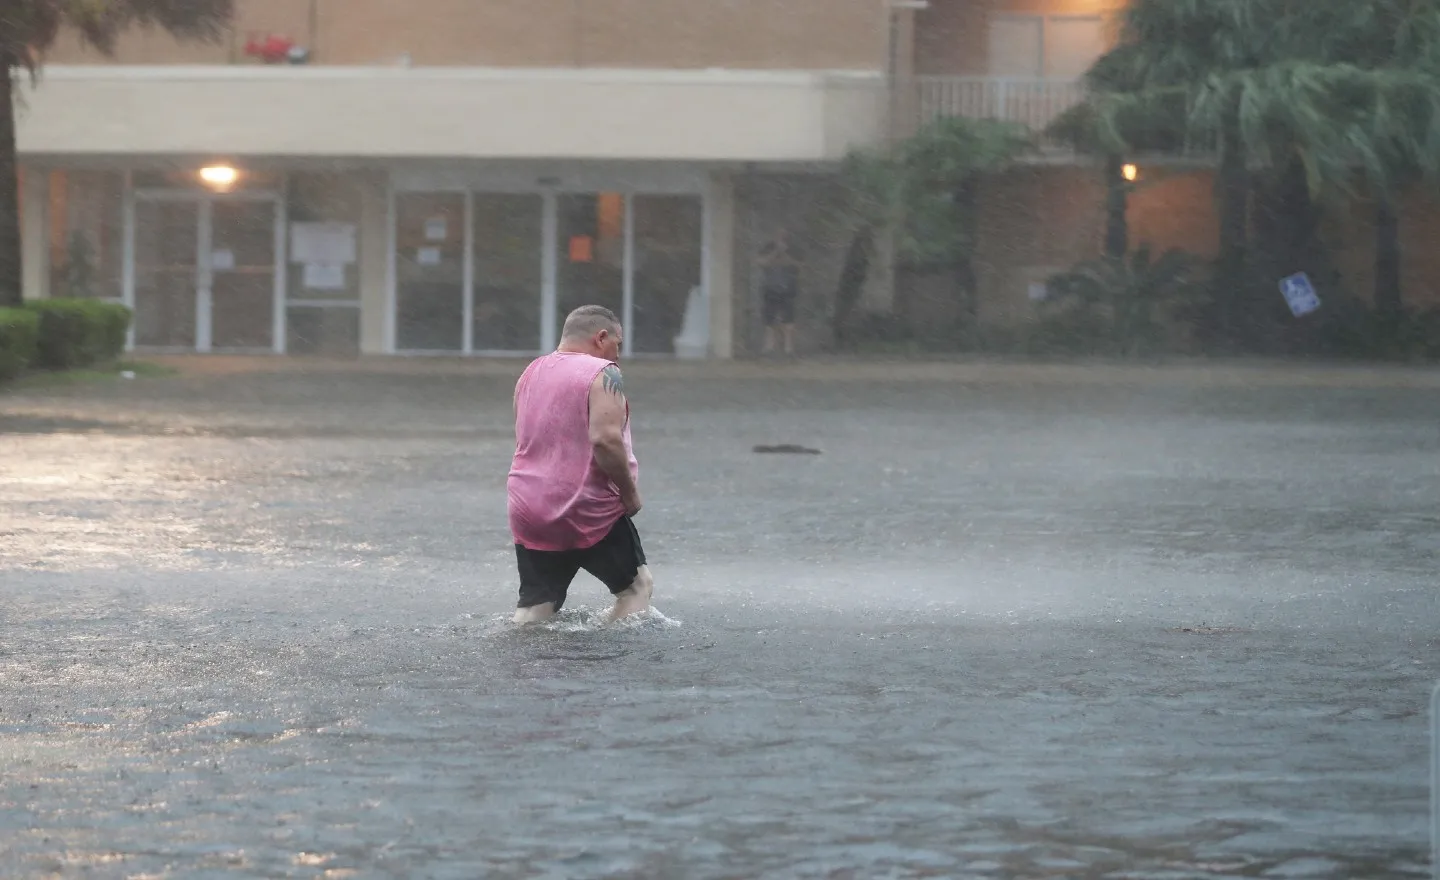 getty:A man walks though a flooded parking lot as the outer bands of Hurricane Sally come ashore on September 15, 2020 in Gulf Shores, Alabama